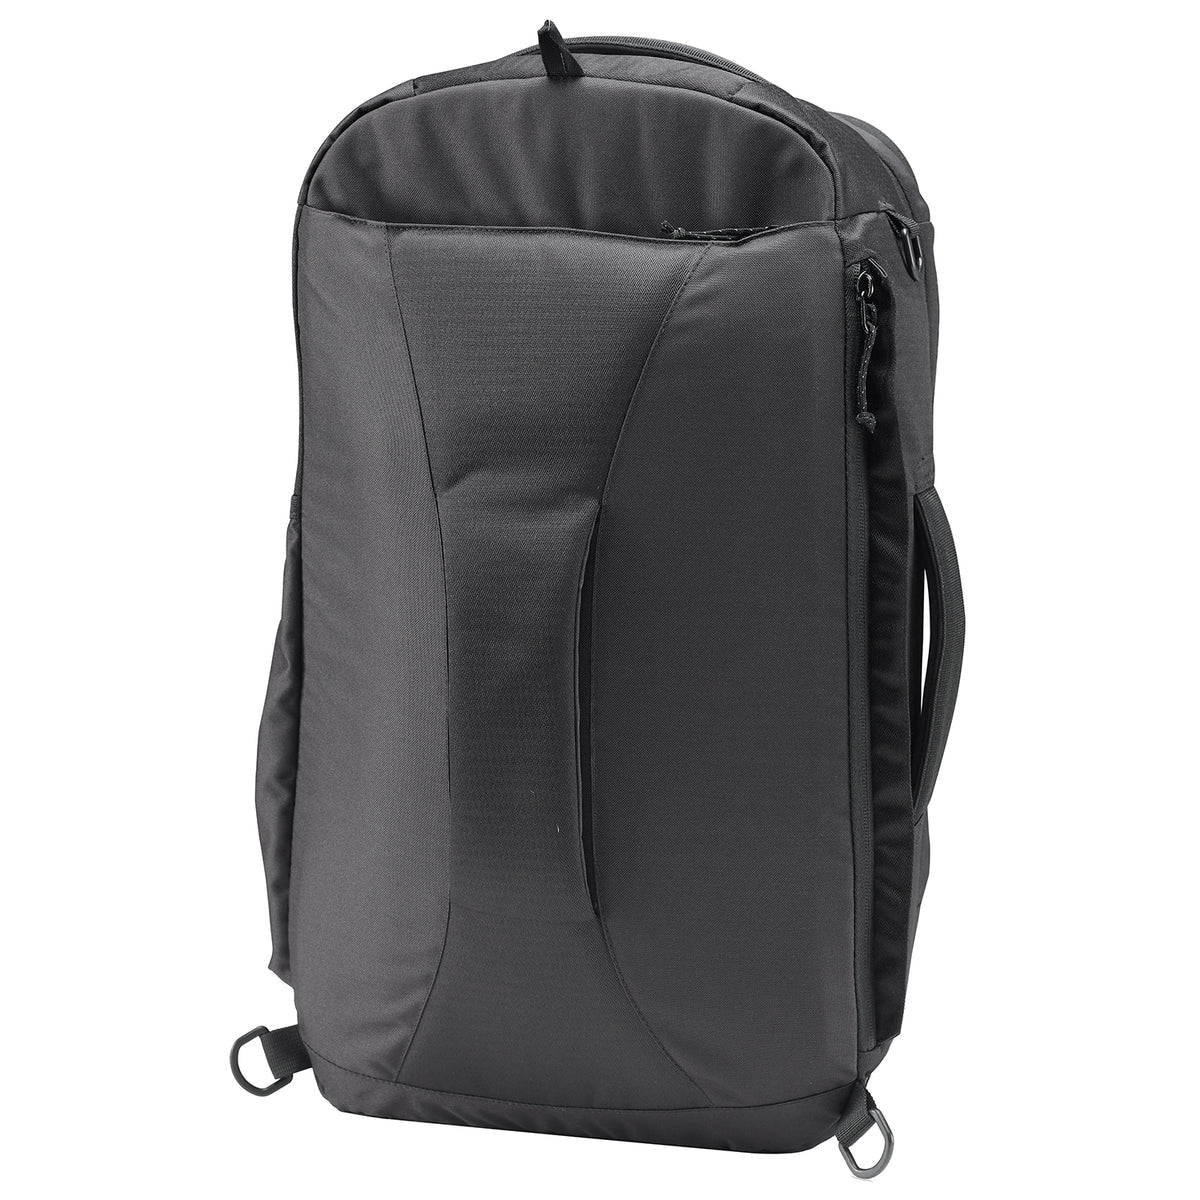 Caribee Traveller 40 Carry On Backpack